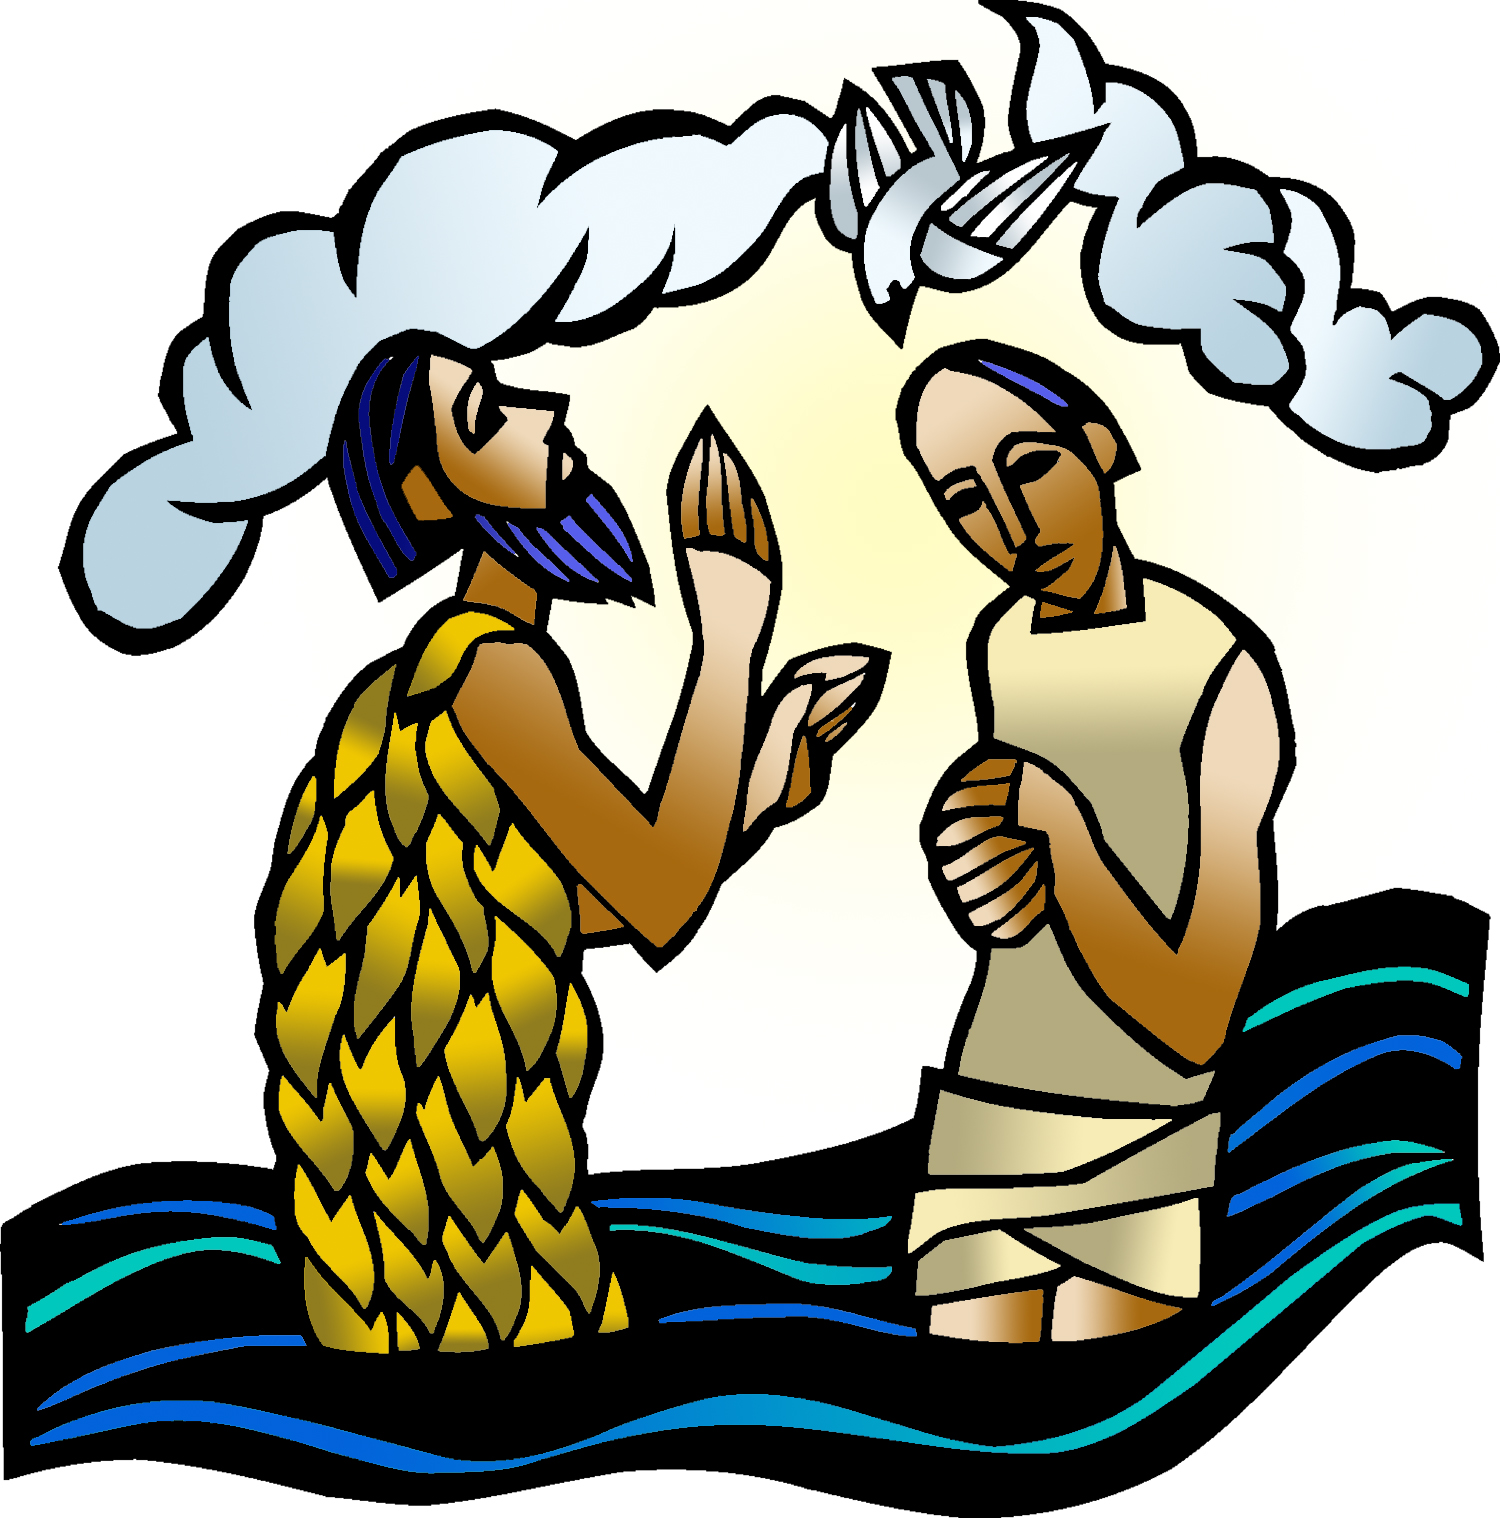 baptism of the lord clipart - photo #25